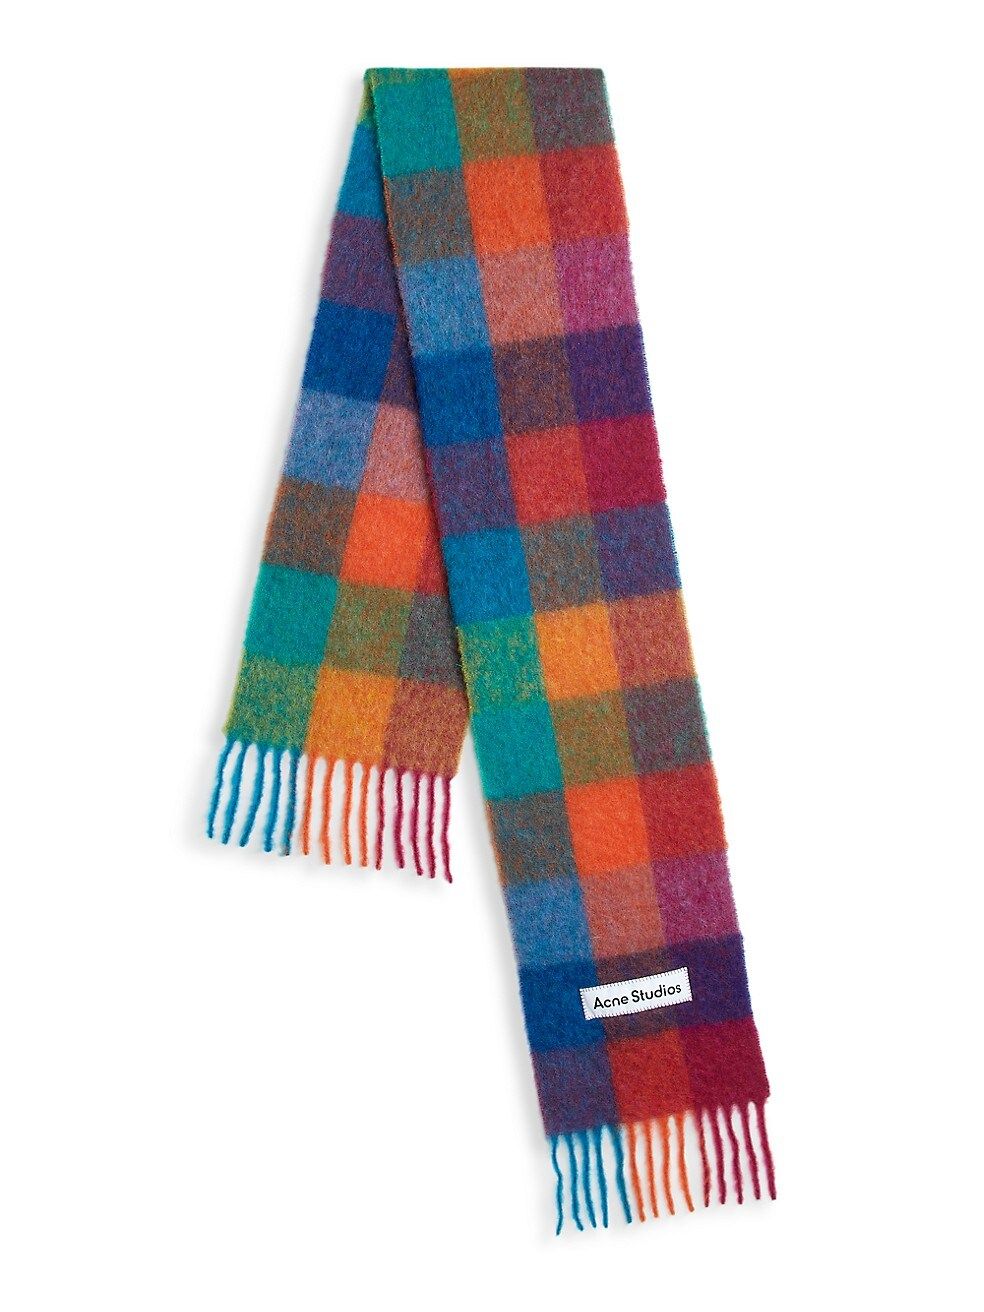 Acne Studios Vally Wool Check Scarf | Saks Fifth Avenue